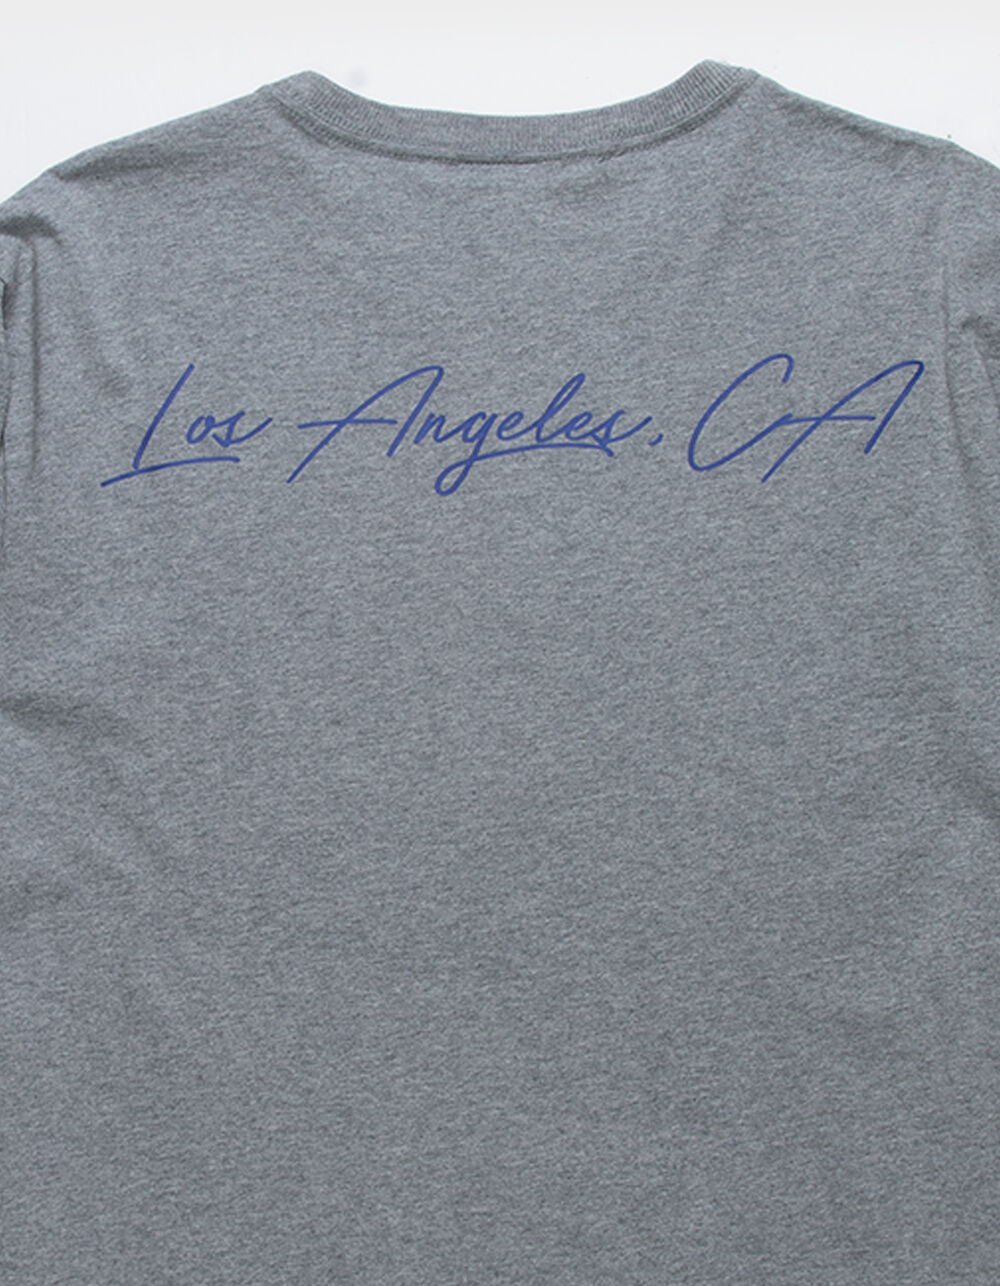 MITCHELL & NESS Los Angeles Dodgers Champions Mens Tee